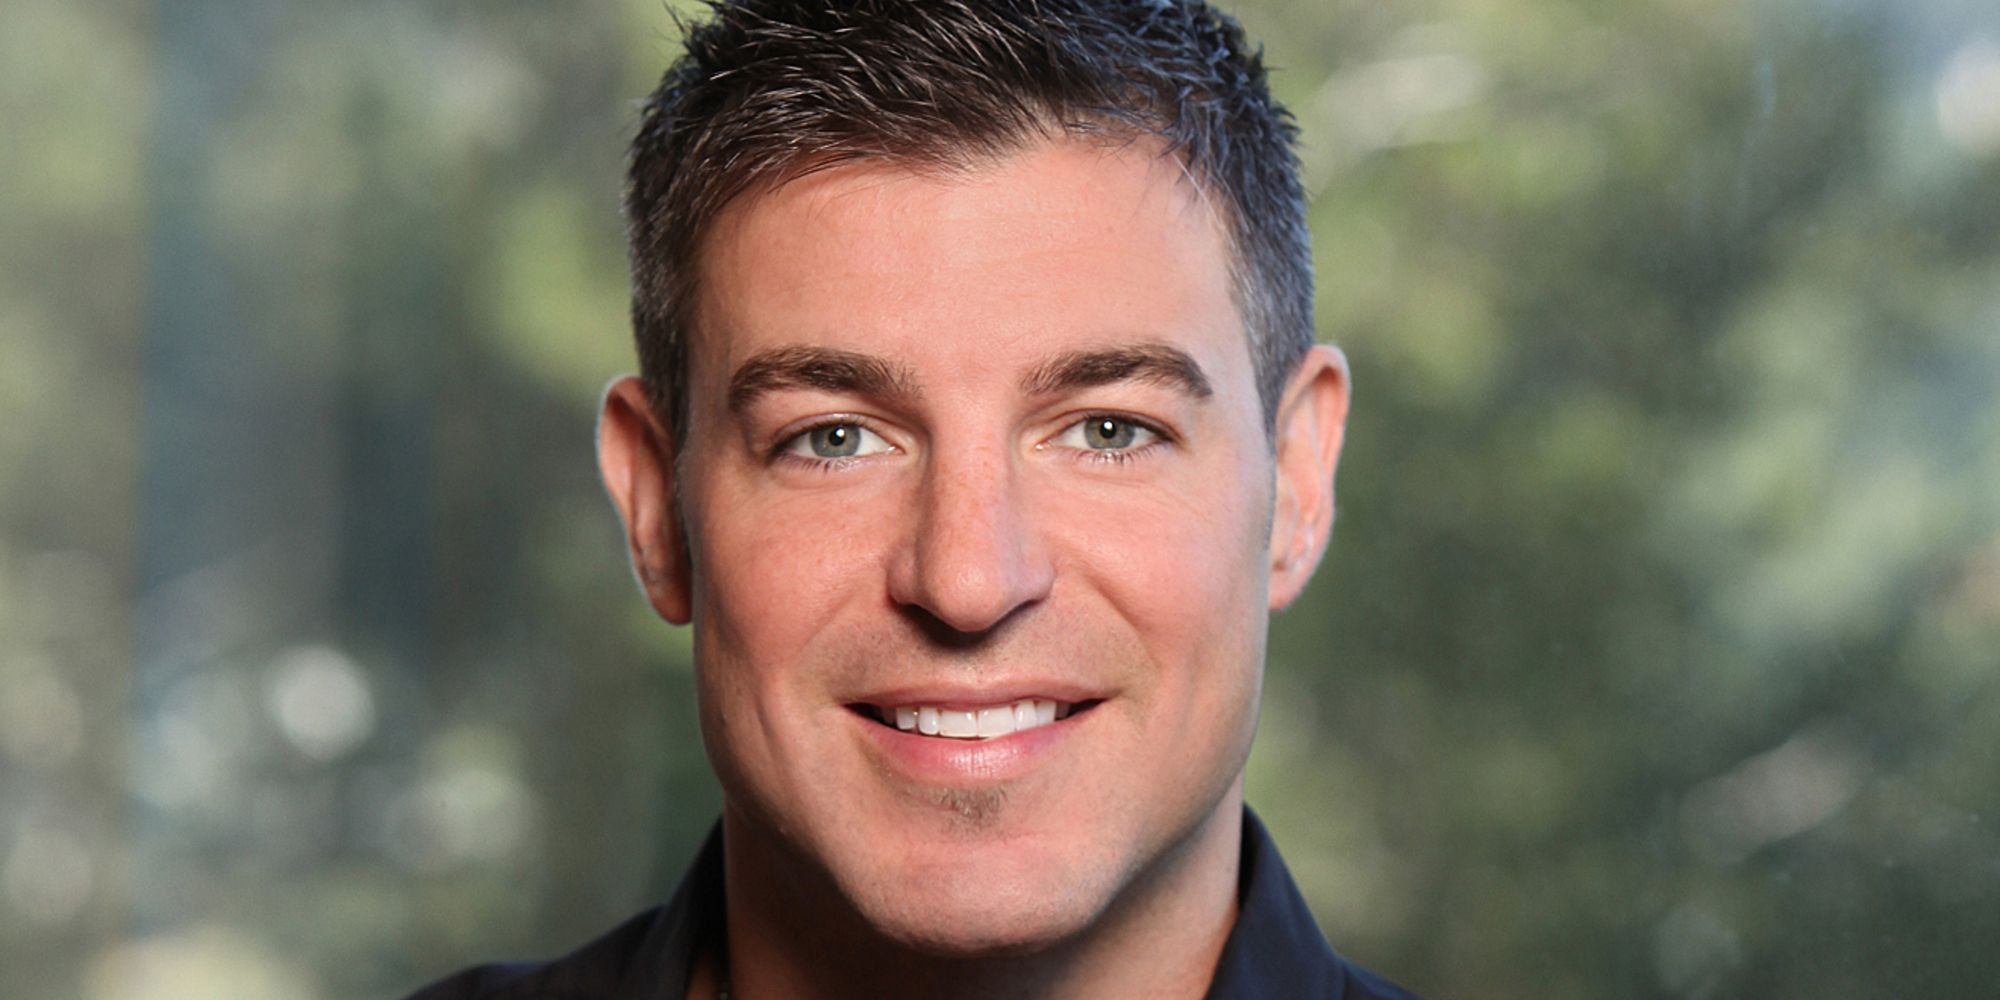 Jeff Schroeder smiling for a promo image for Big Brother 13.